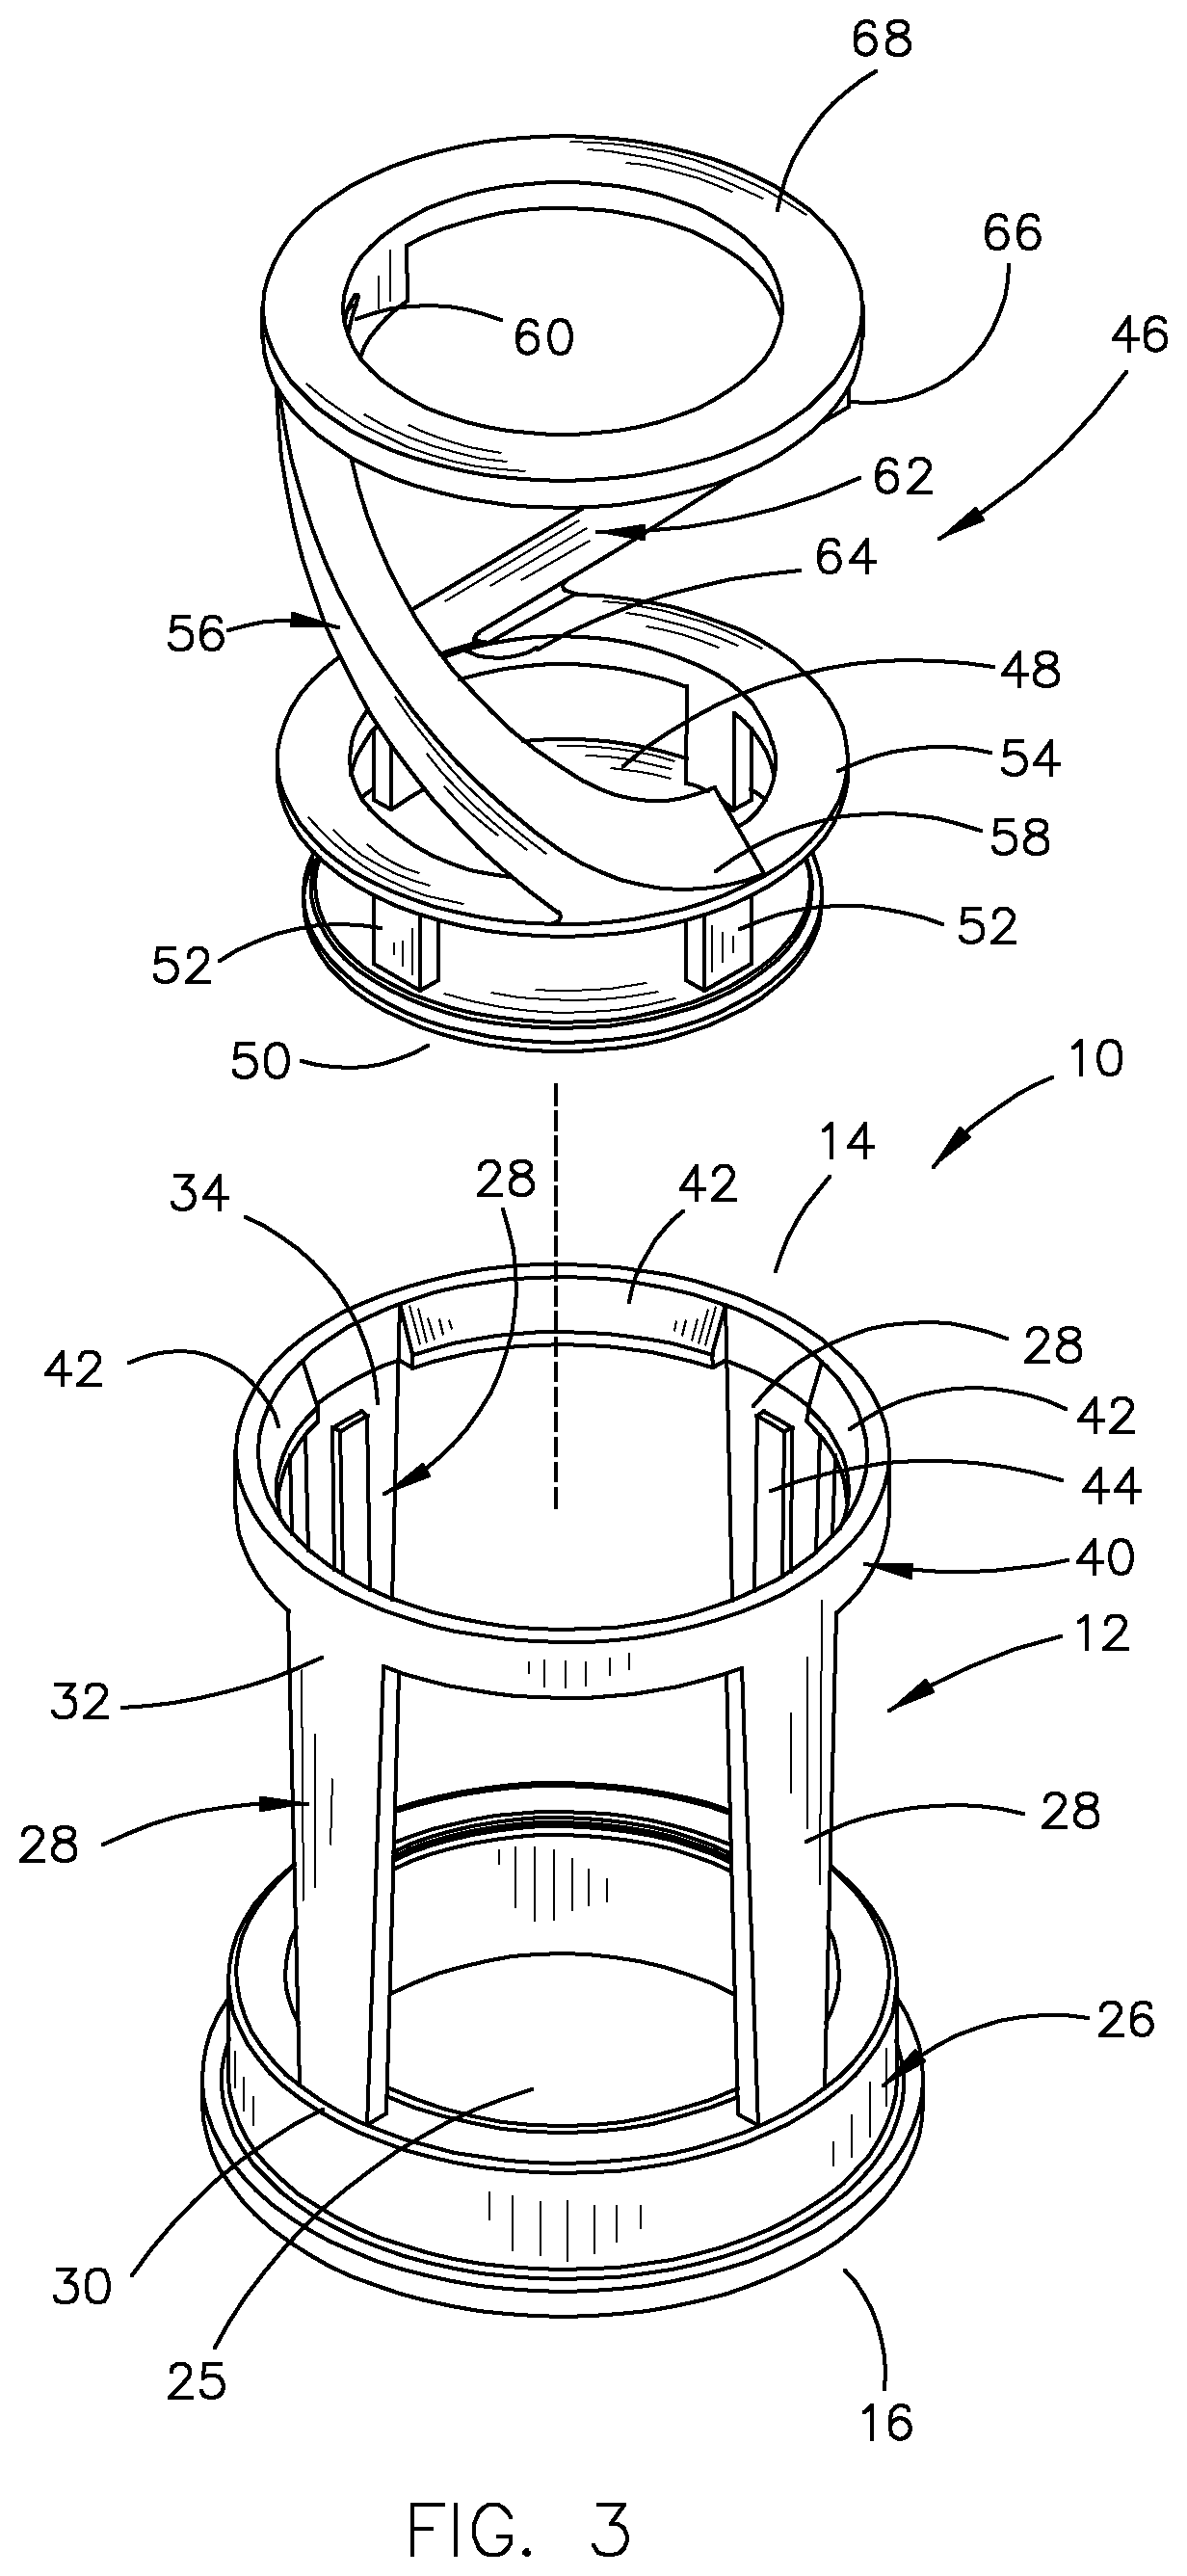 Overmolded valve for a liquid container